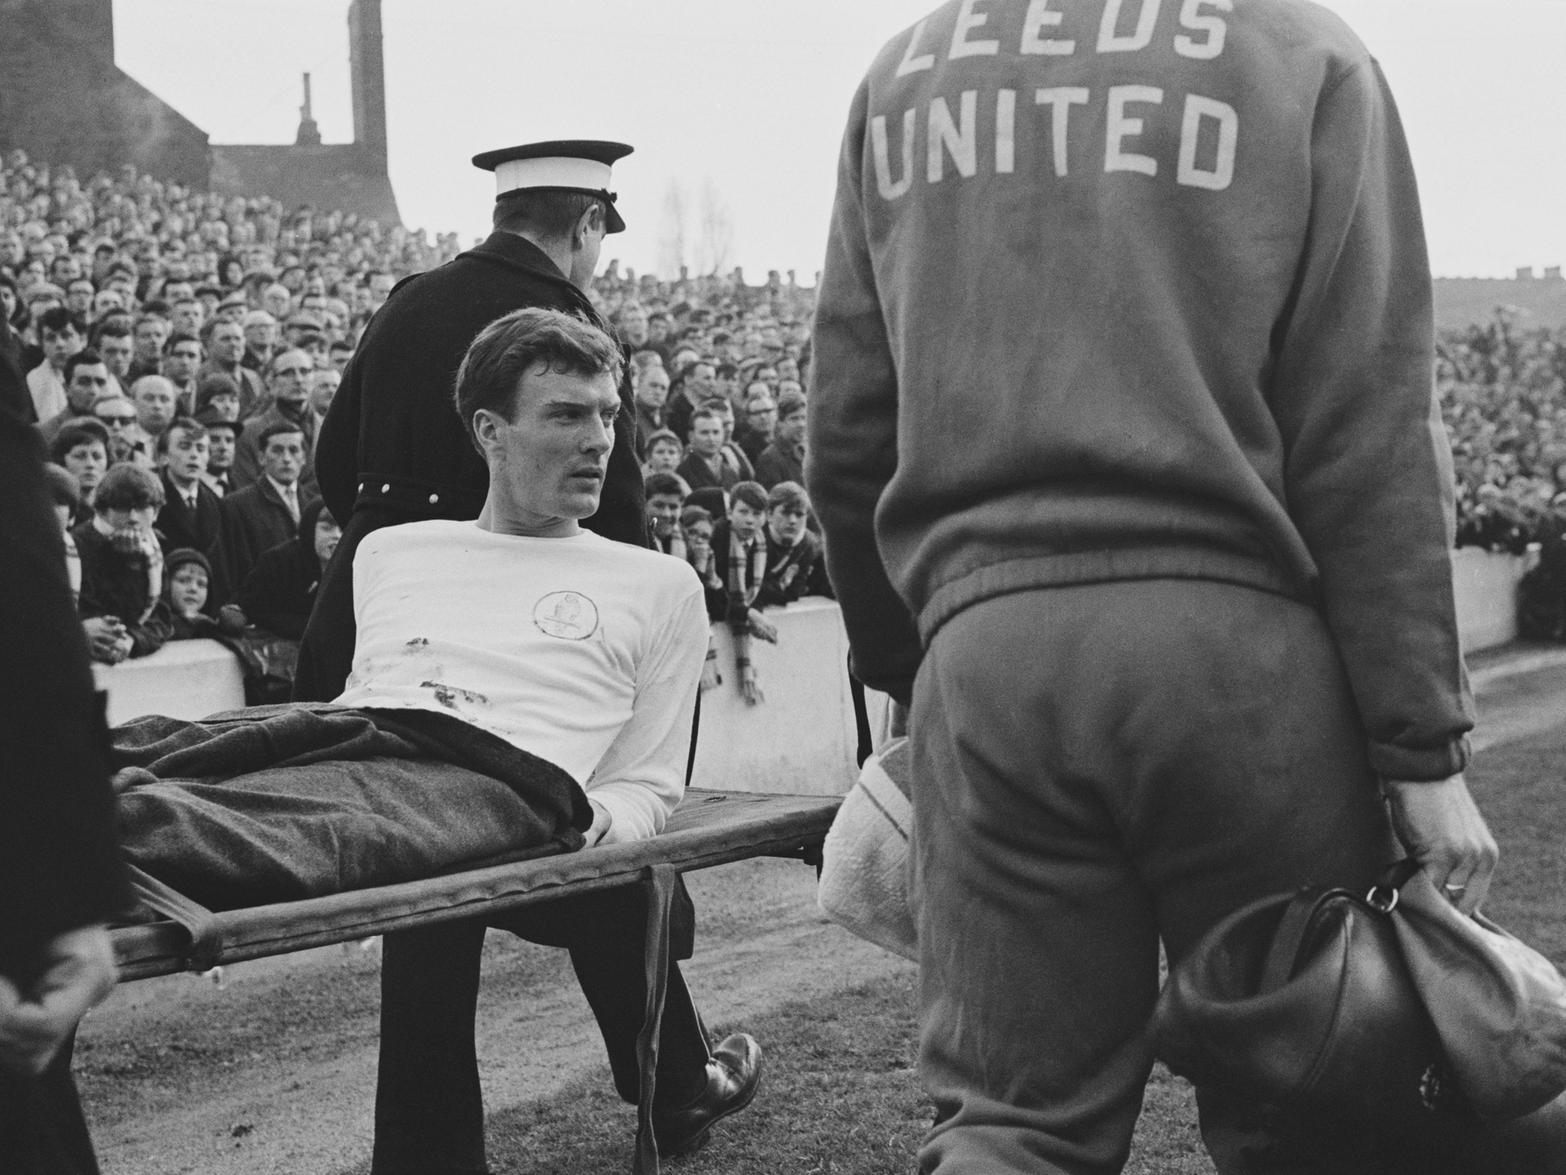 Being stretchered off in the 1960s.